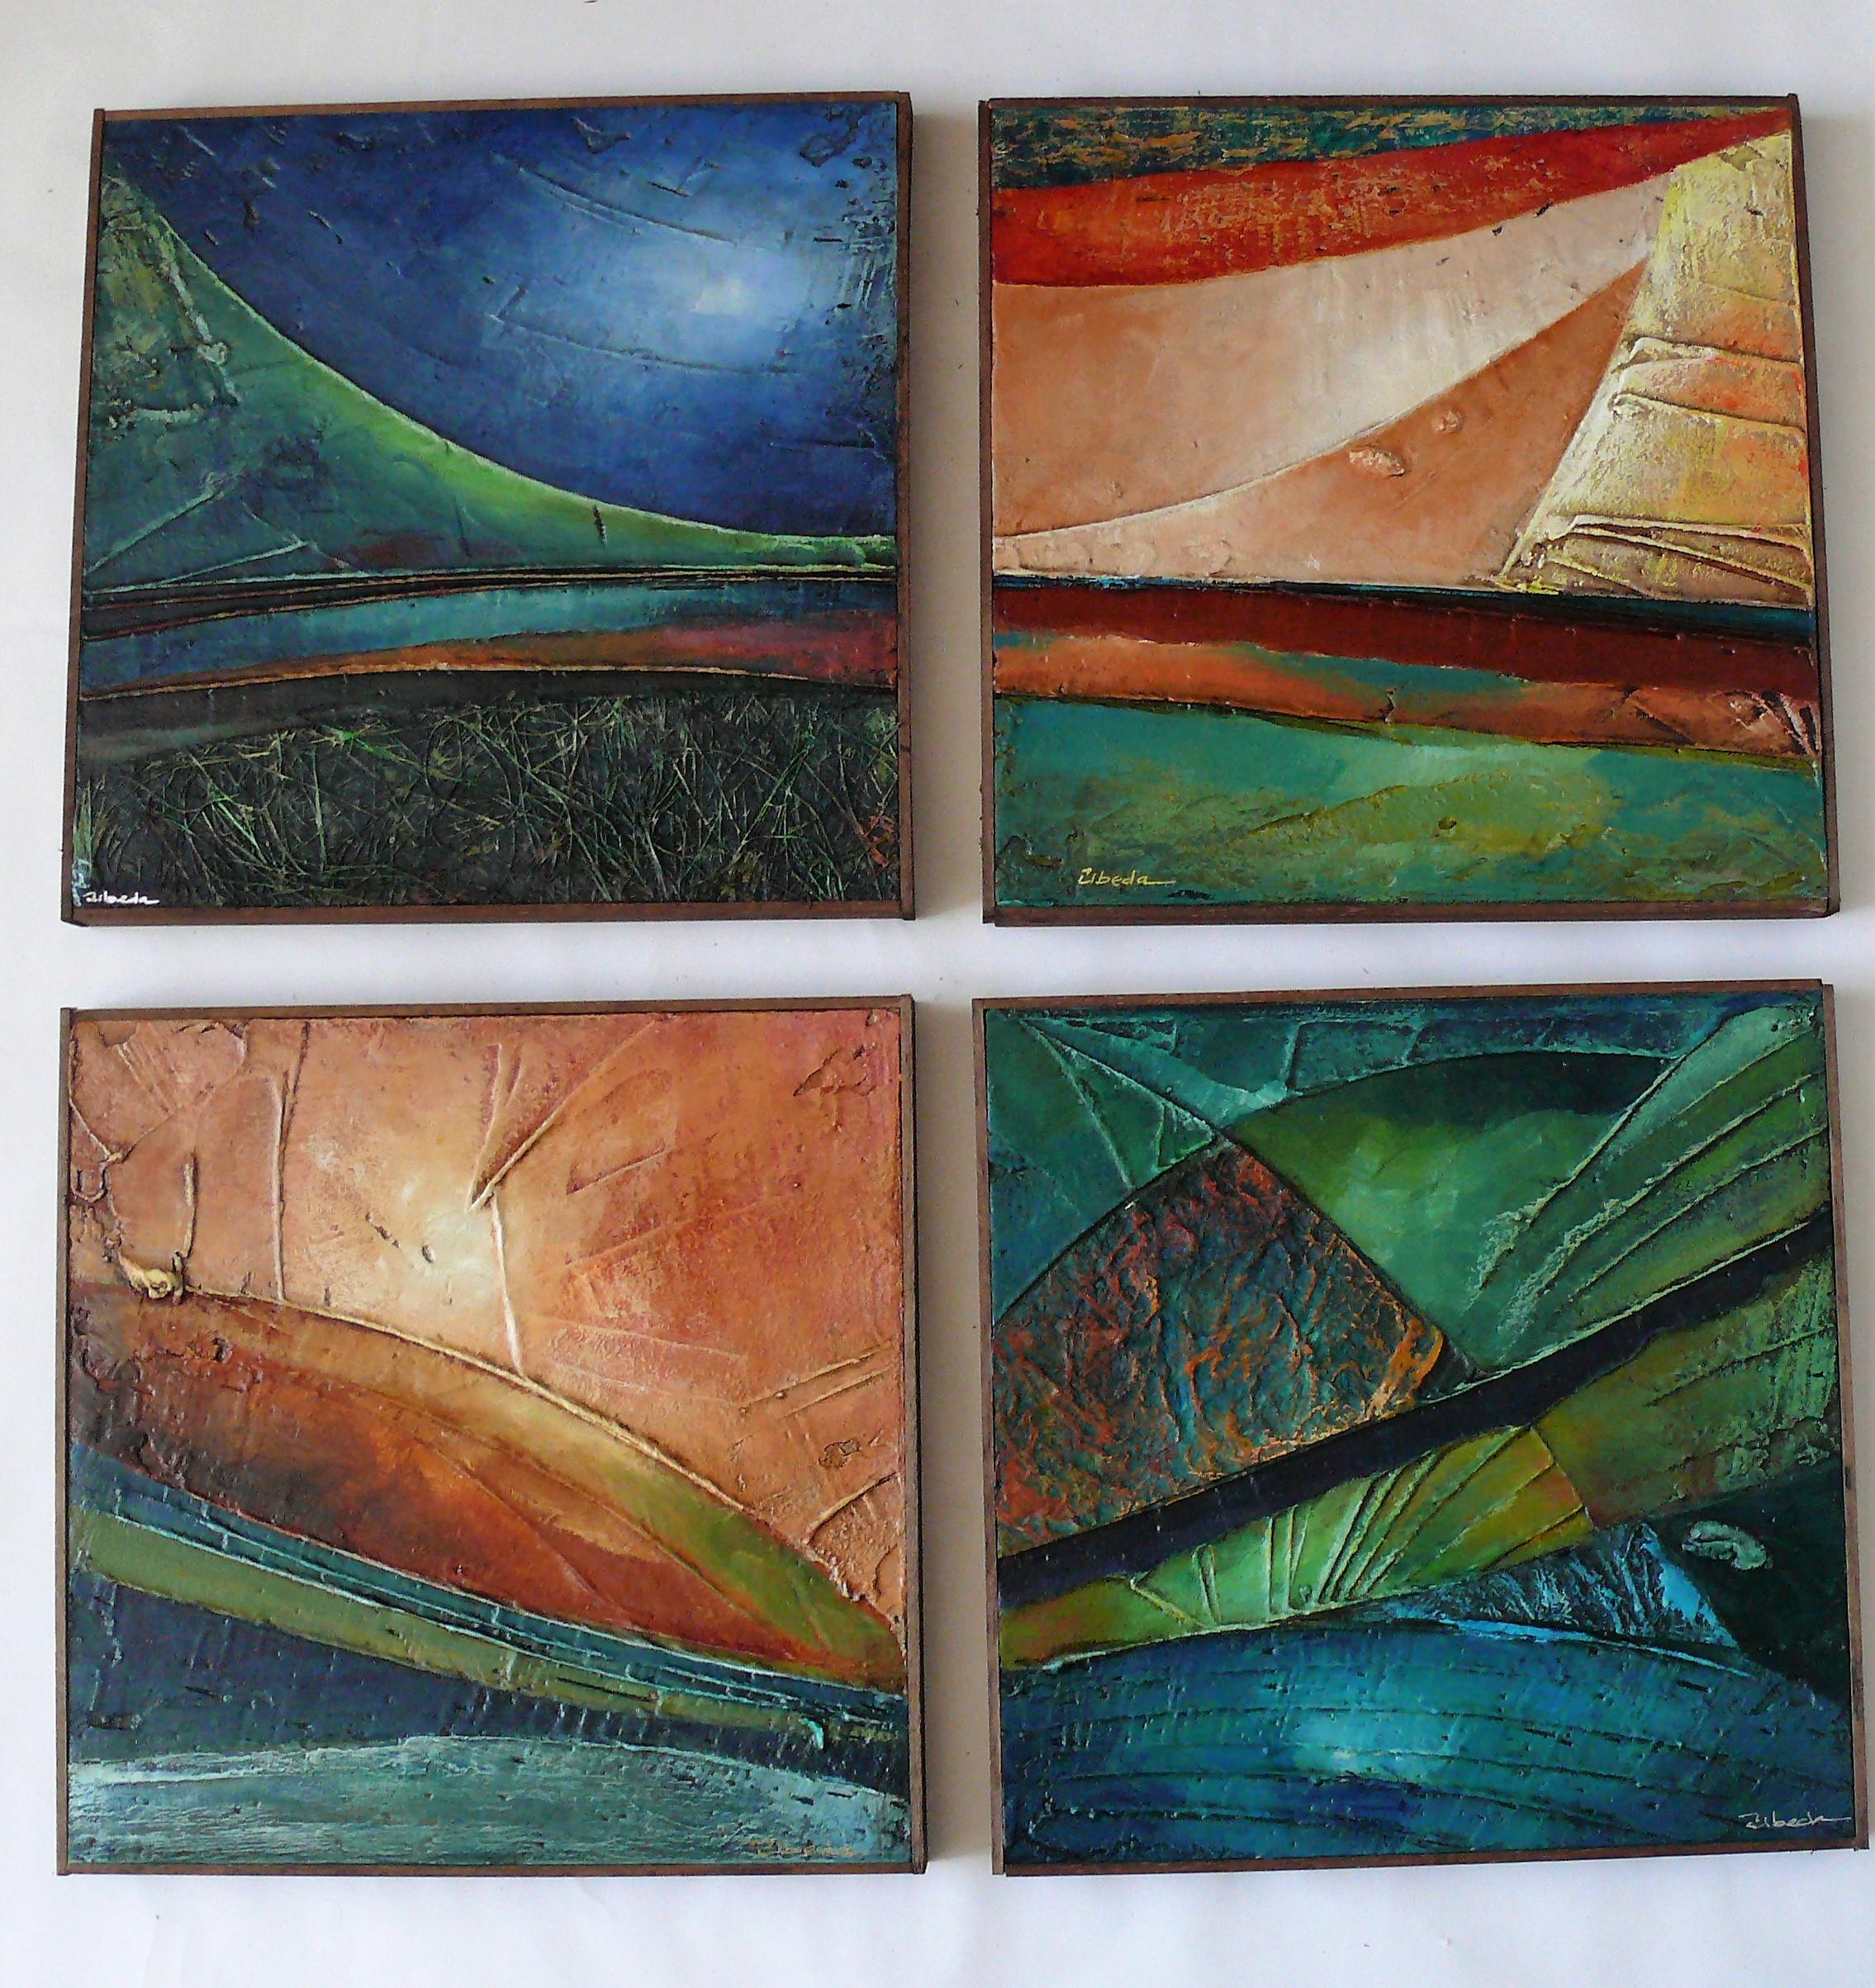 Ángel Luis Úbeda Landscape Painting - "Tesserae". Úbeda. 4 pieces acrylic on panel forming abstract mosaic landscape.